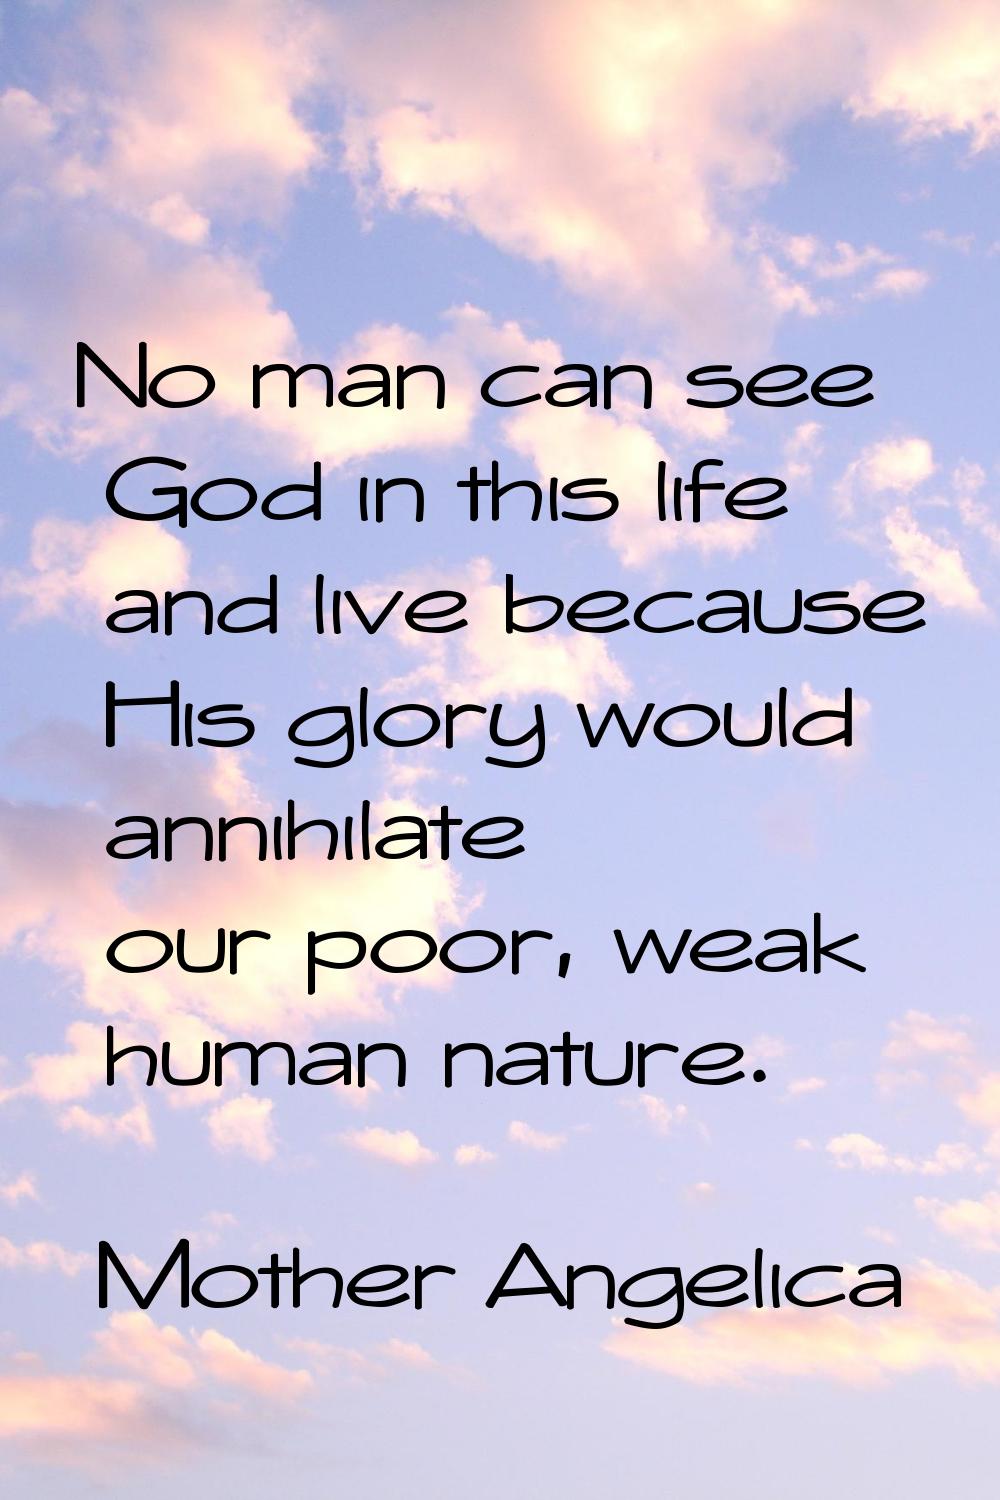 No man can see God in this life and live because His glory would annihilate our poor, weak human na